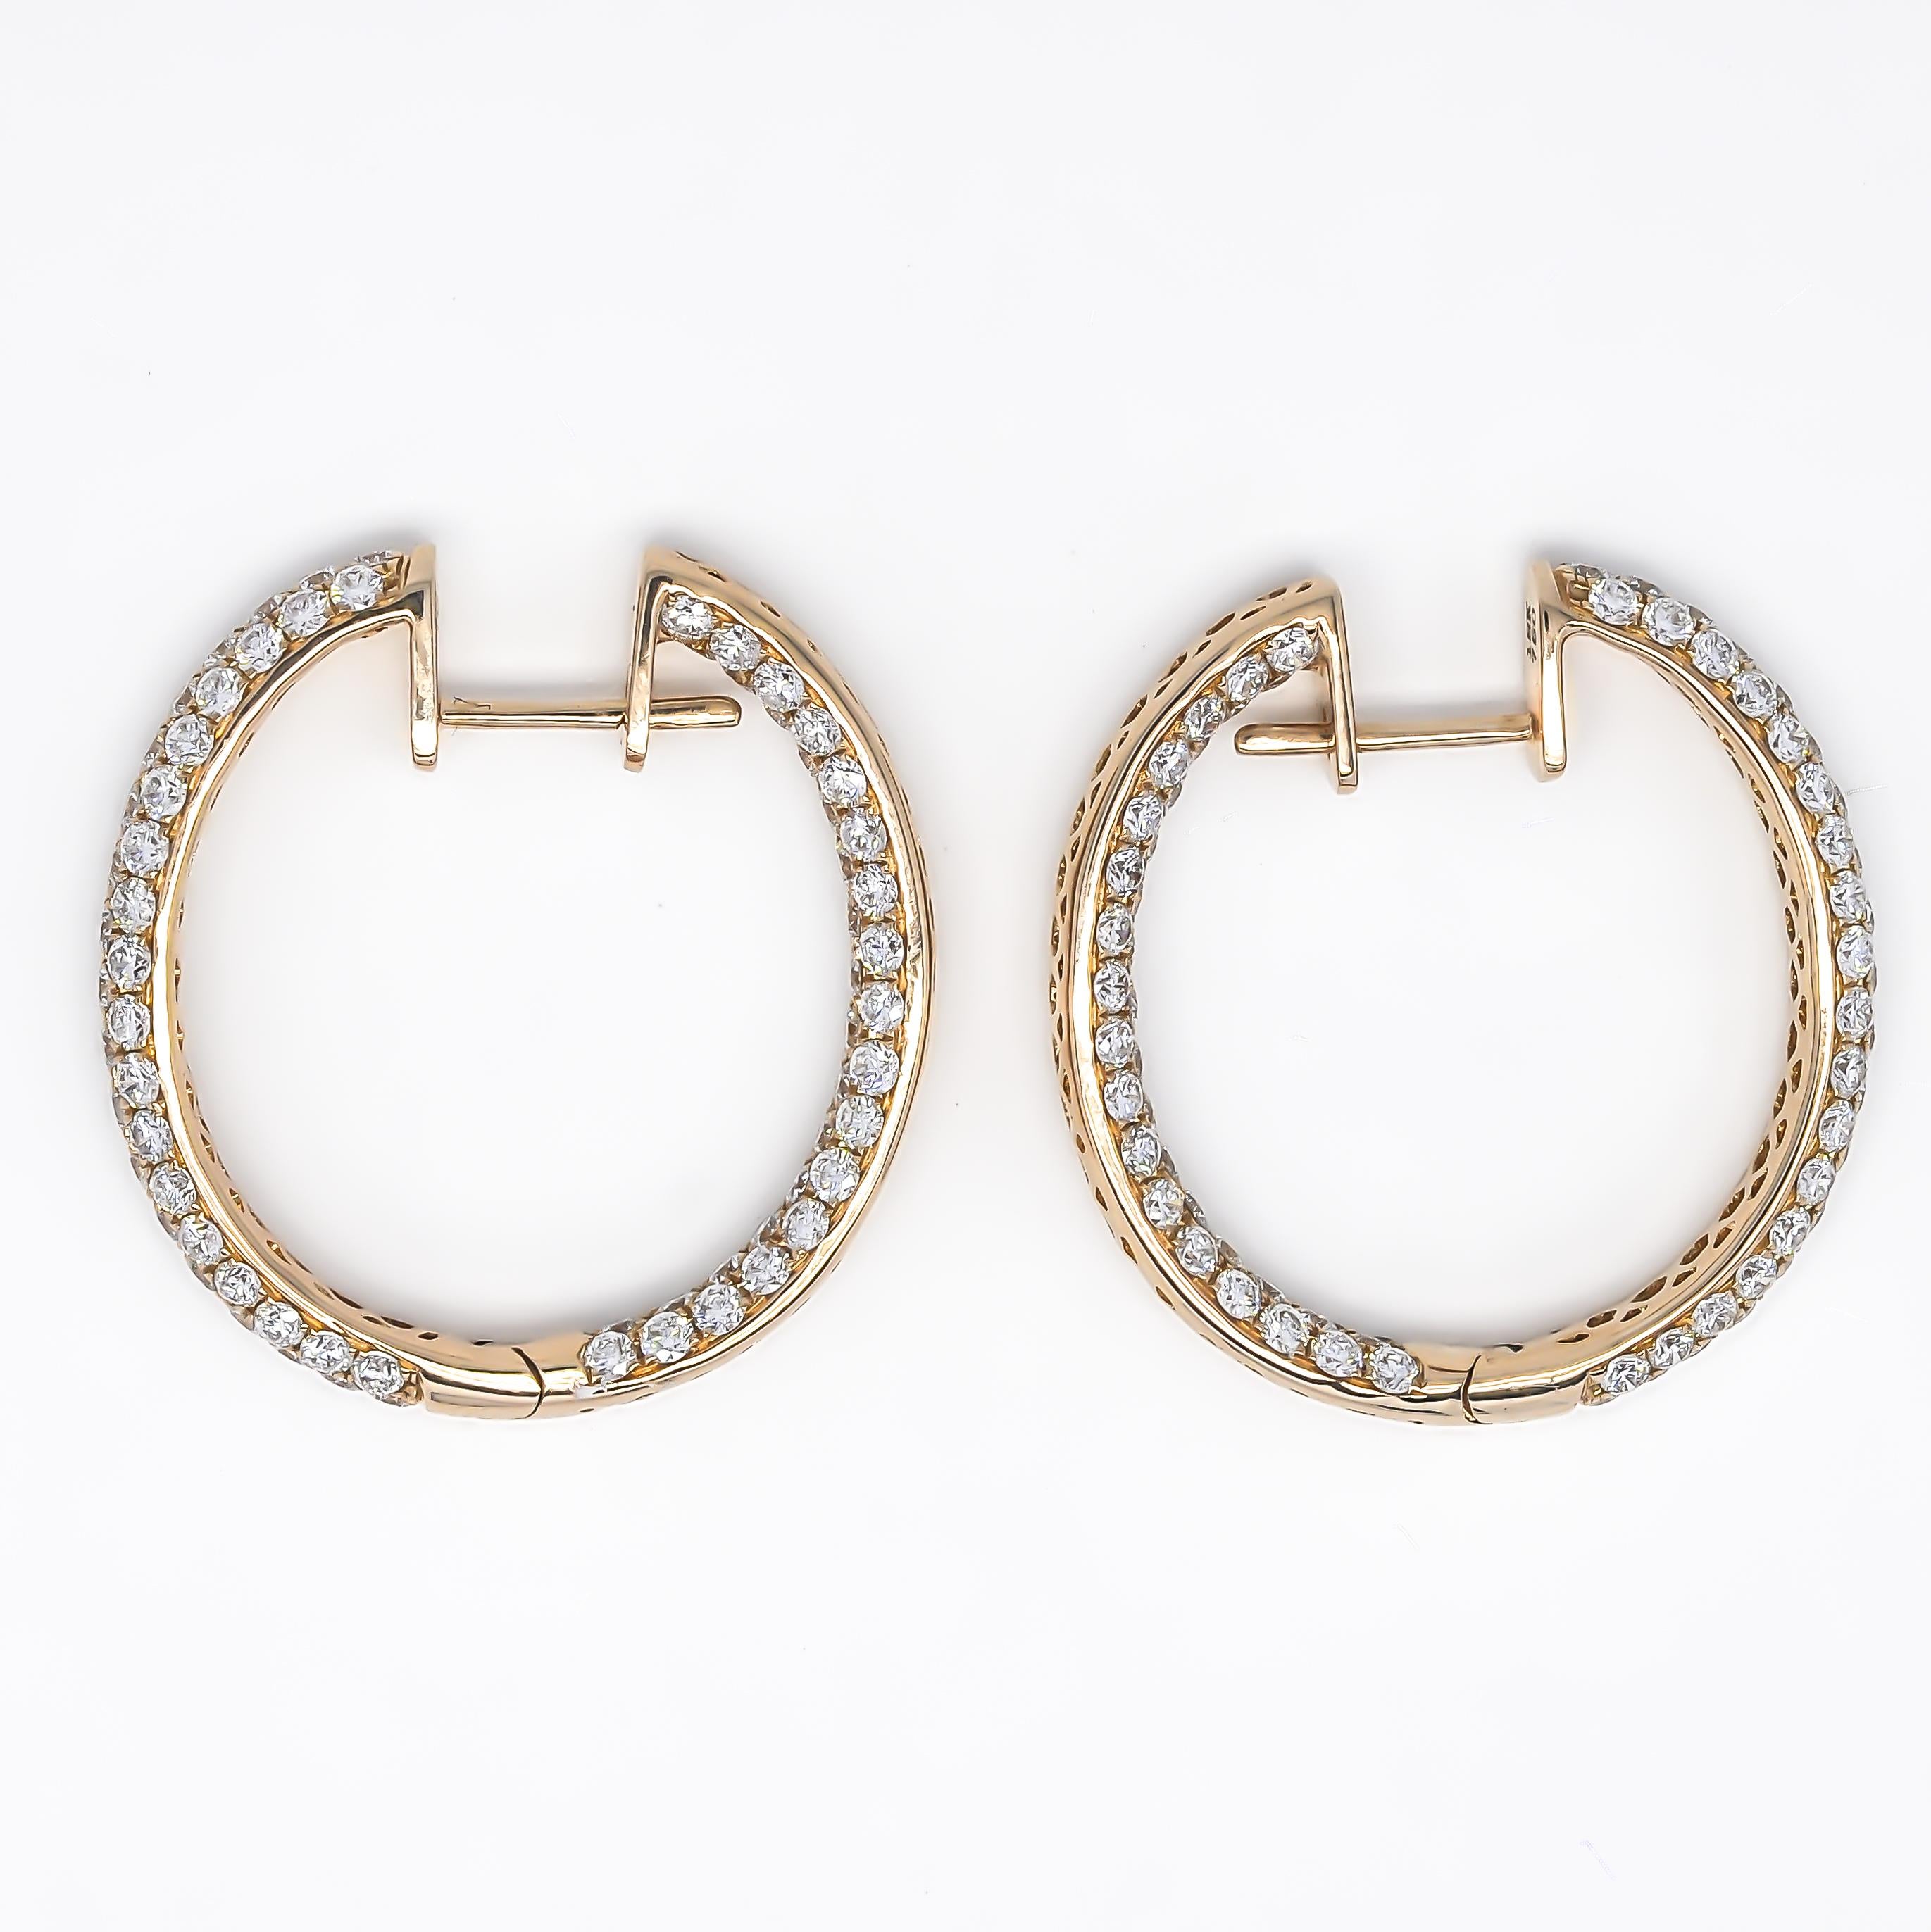 Presenting the 18KT Rose Gold Natural Diamonds In and Out 3 Row Hoop Earrings - a spectacular fusion of elegance, luxury, and sophistication. These earrings are the epitome of high-end jewelry design, sure to capture the heart of any woman who